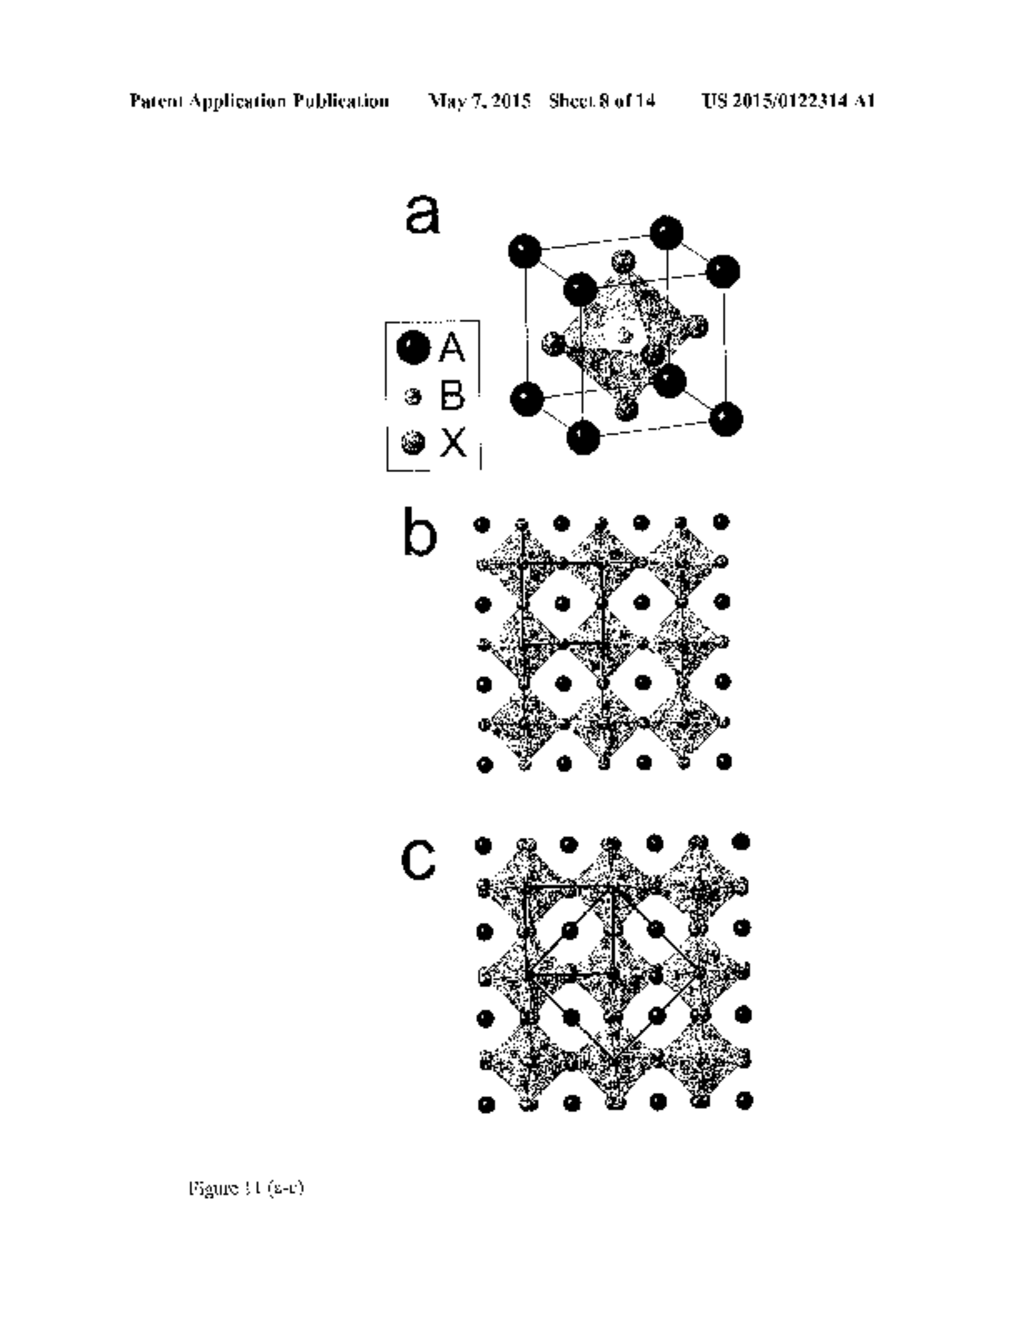 OPTOELECTRONIC DEVICE COMPRISING POROUS SCAFFOLD MATERIAL AND PEROVSKITES - diagram, schematic, and image 09